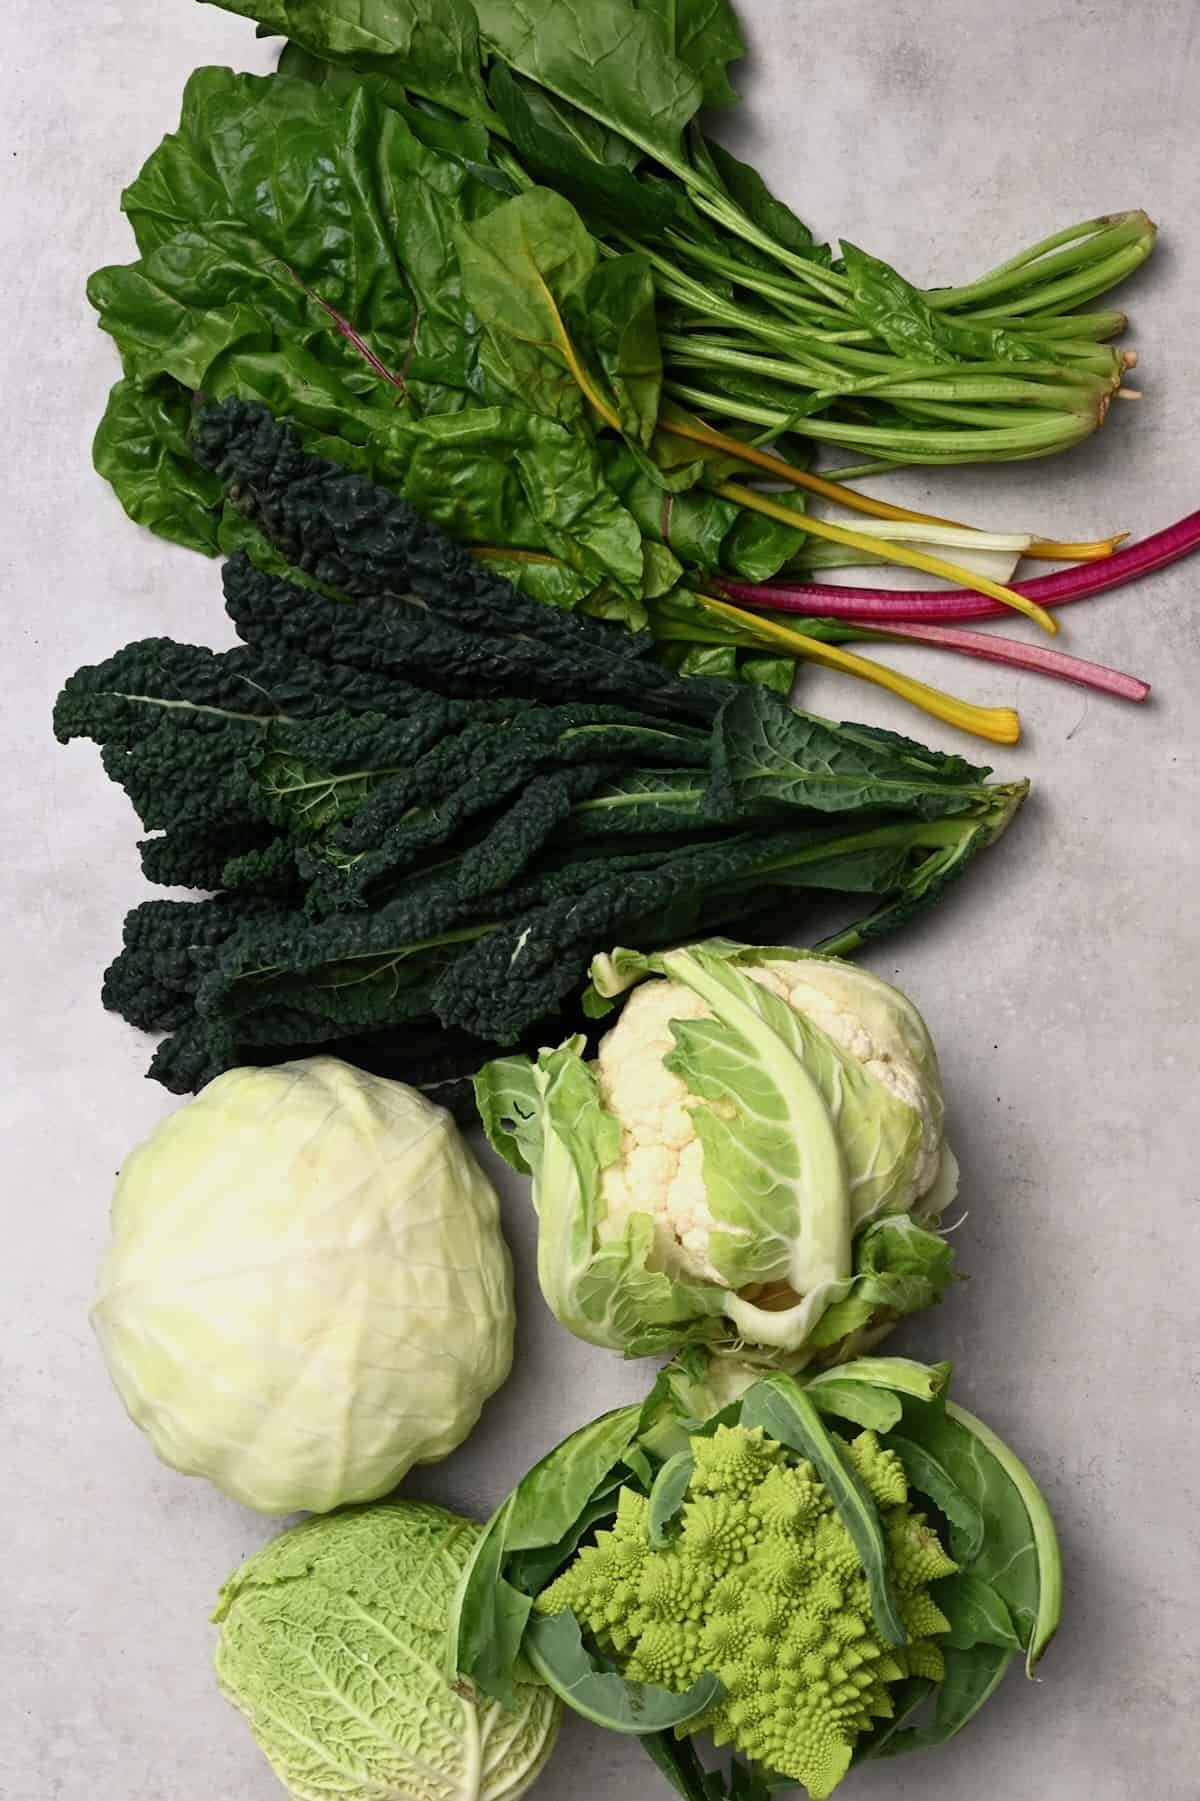 Different types of brassica vegetables on a flat surface